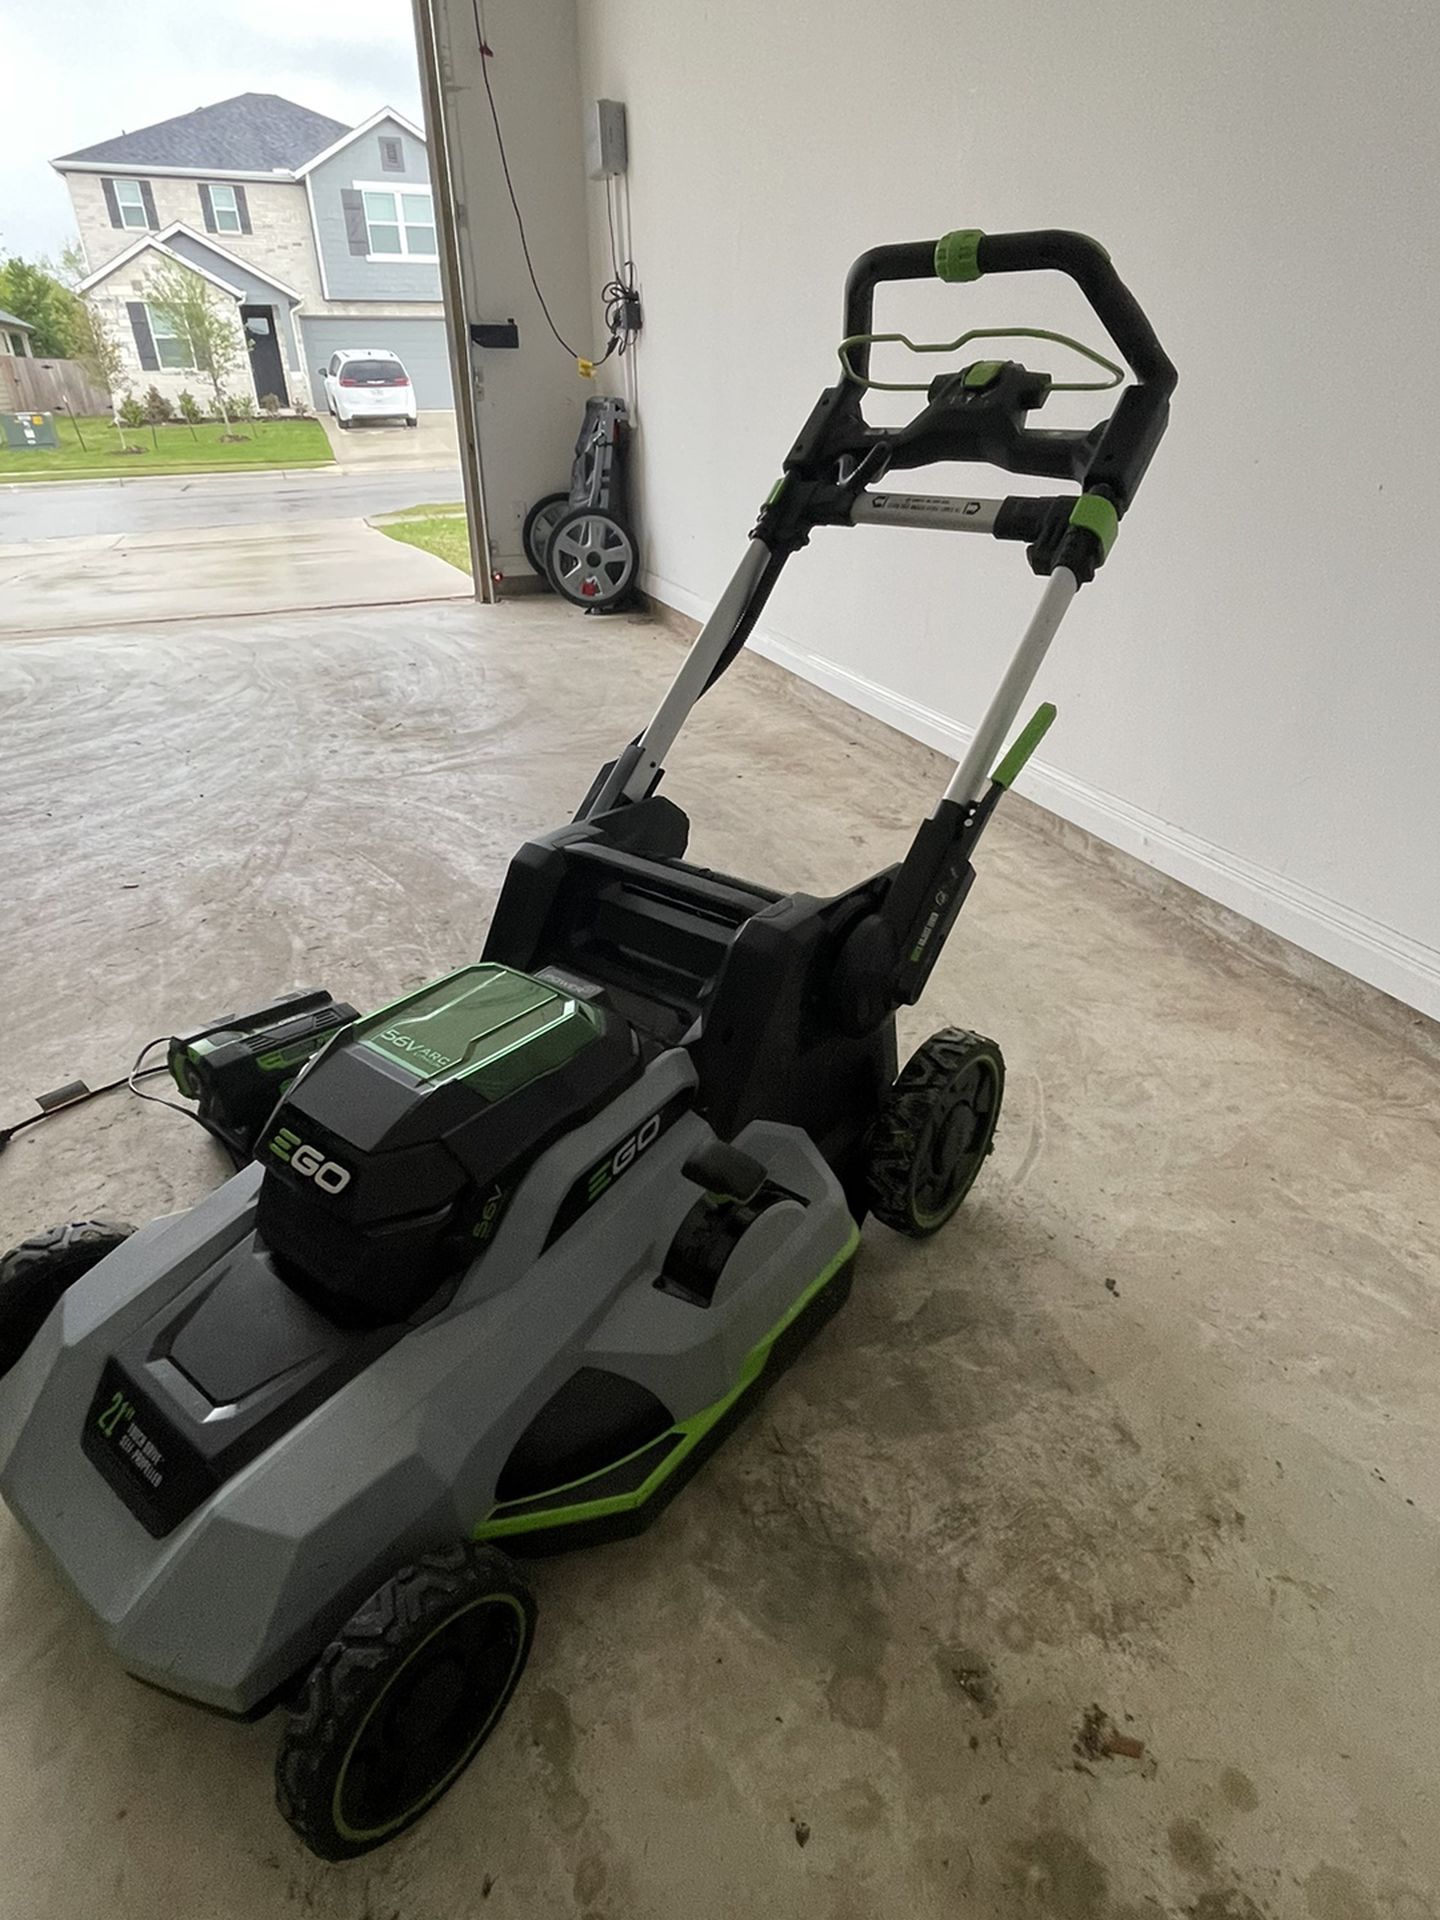 EGO POWER+ Touch Drive 56-volt 21-in Cordless Self-propelled Lawn Mower (Model #LM2120SP)